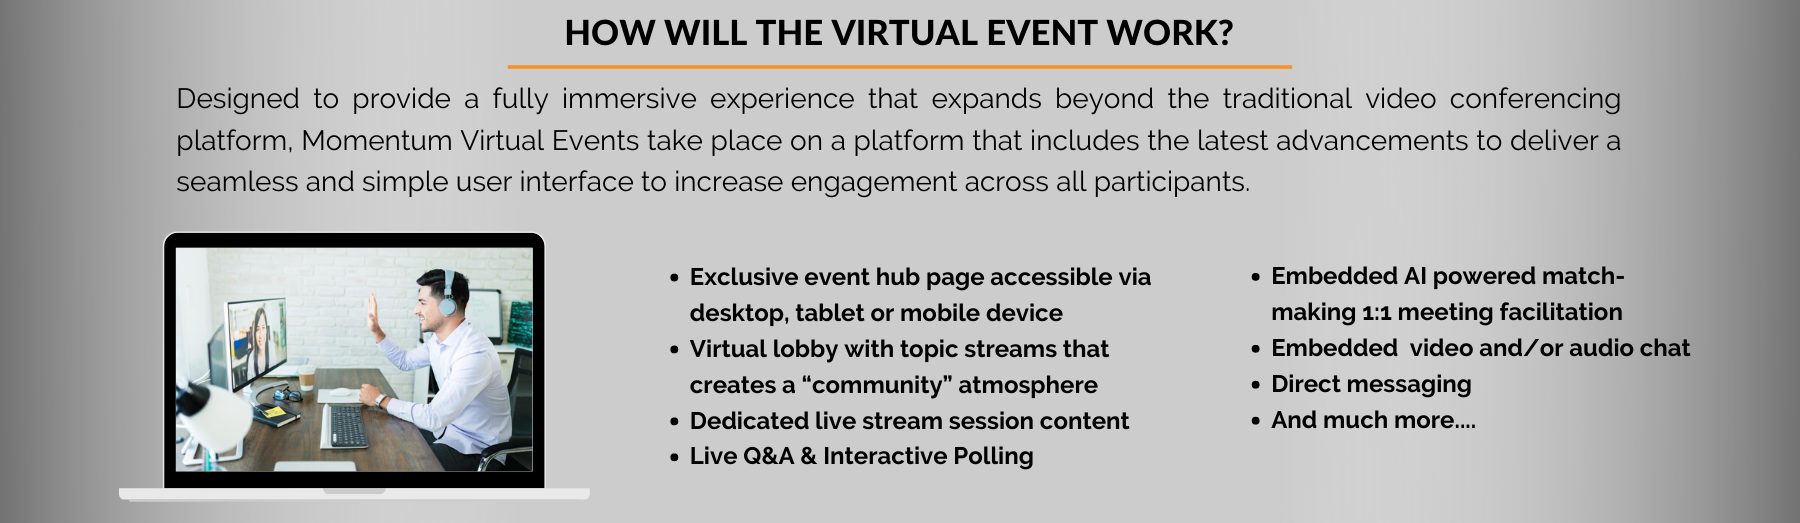 How Will The Virtual Event Work?